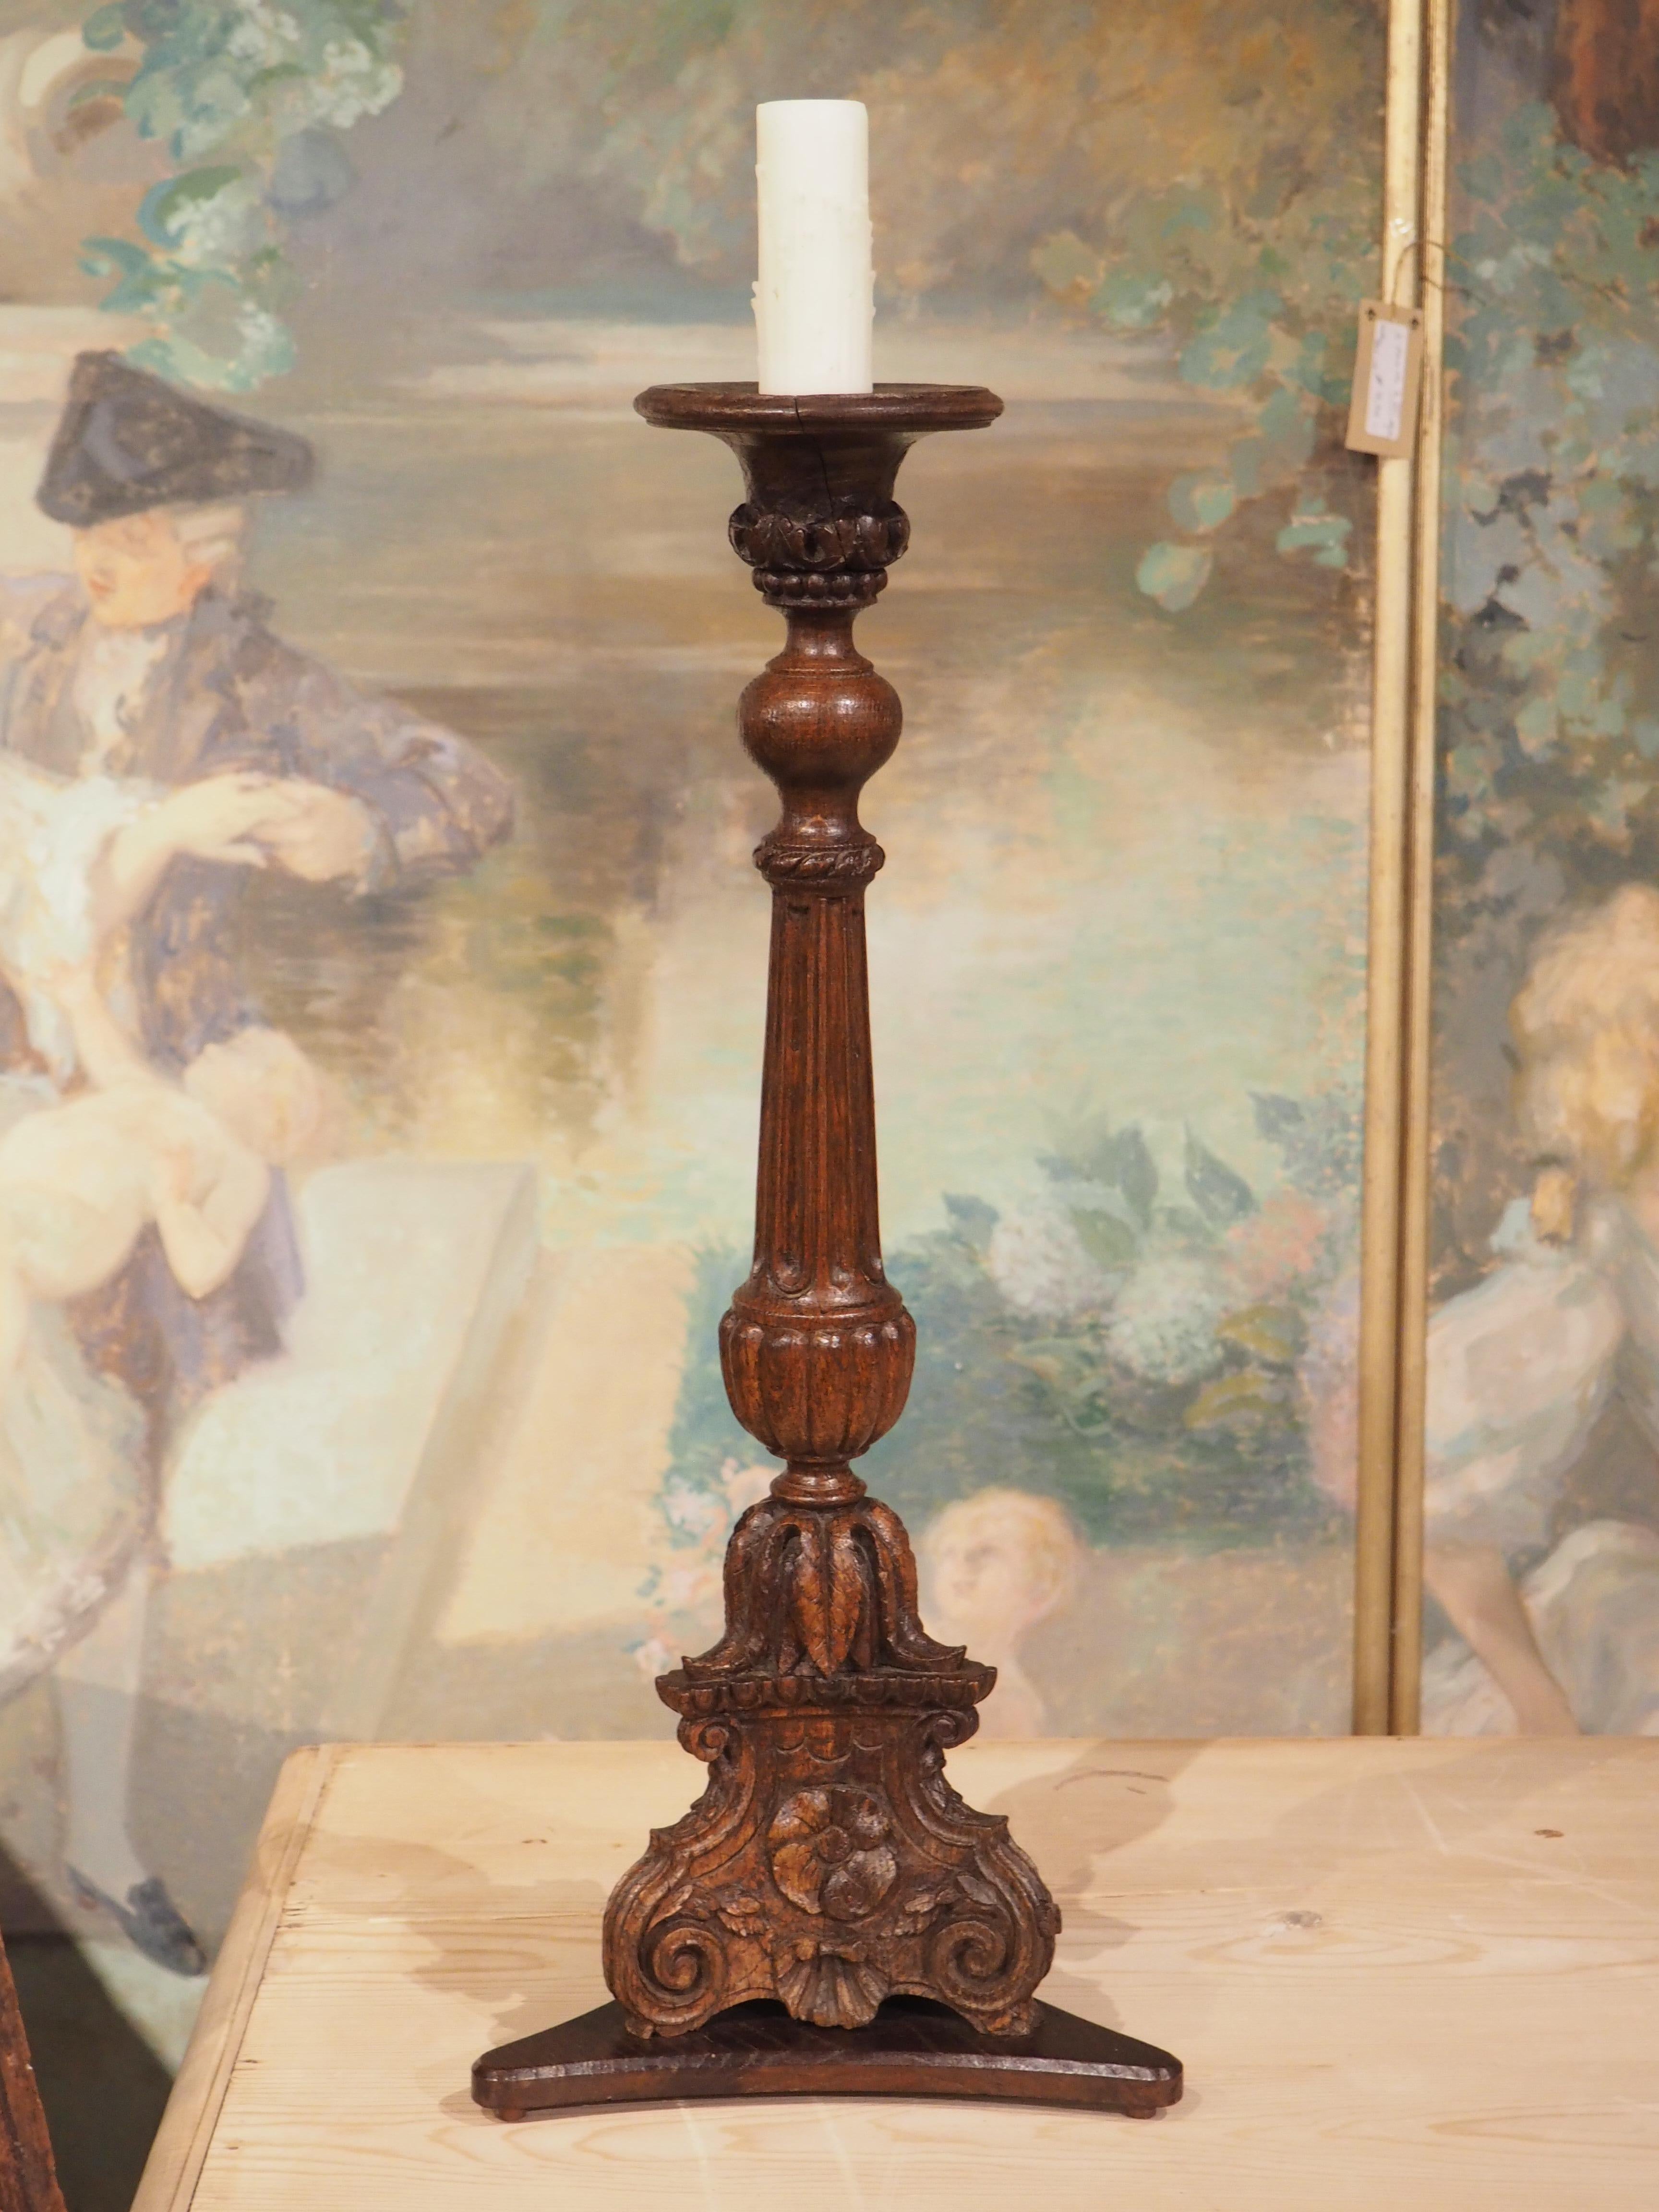 Louis XVI Finely Carved Antique Oak Candlestick from France, Late 18th Century